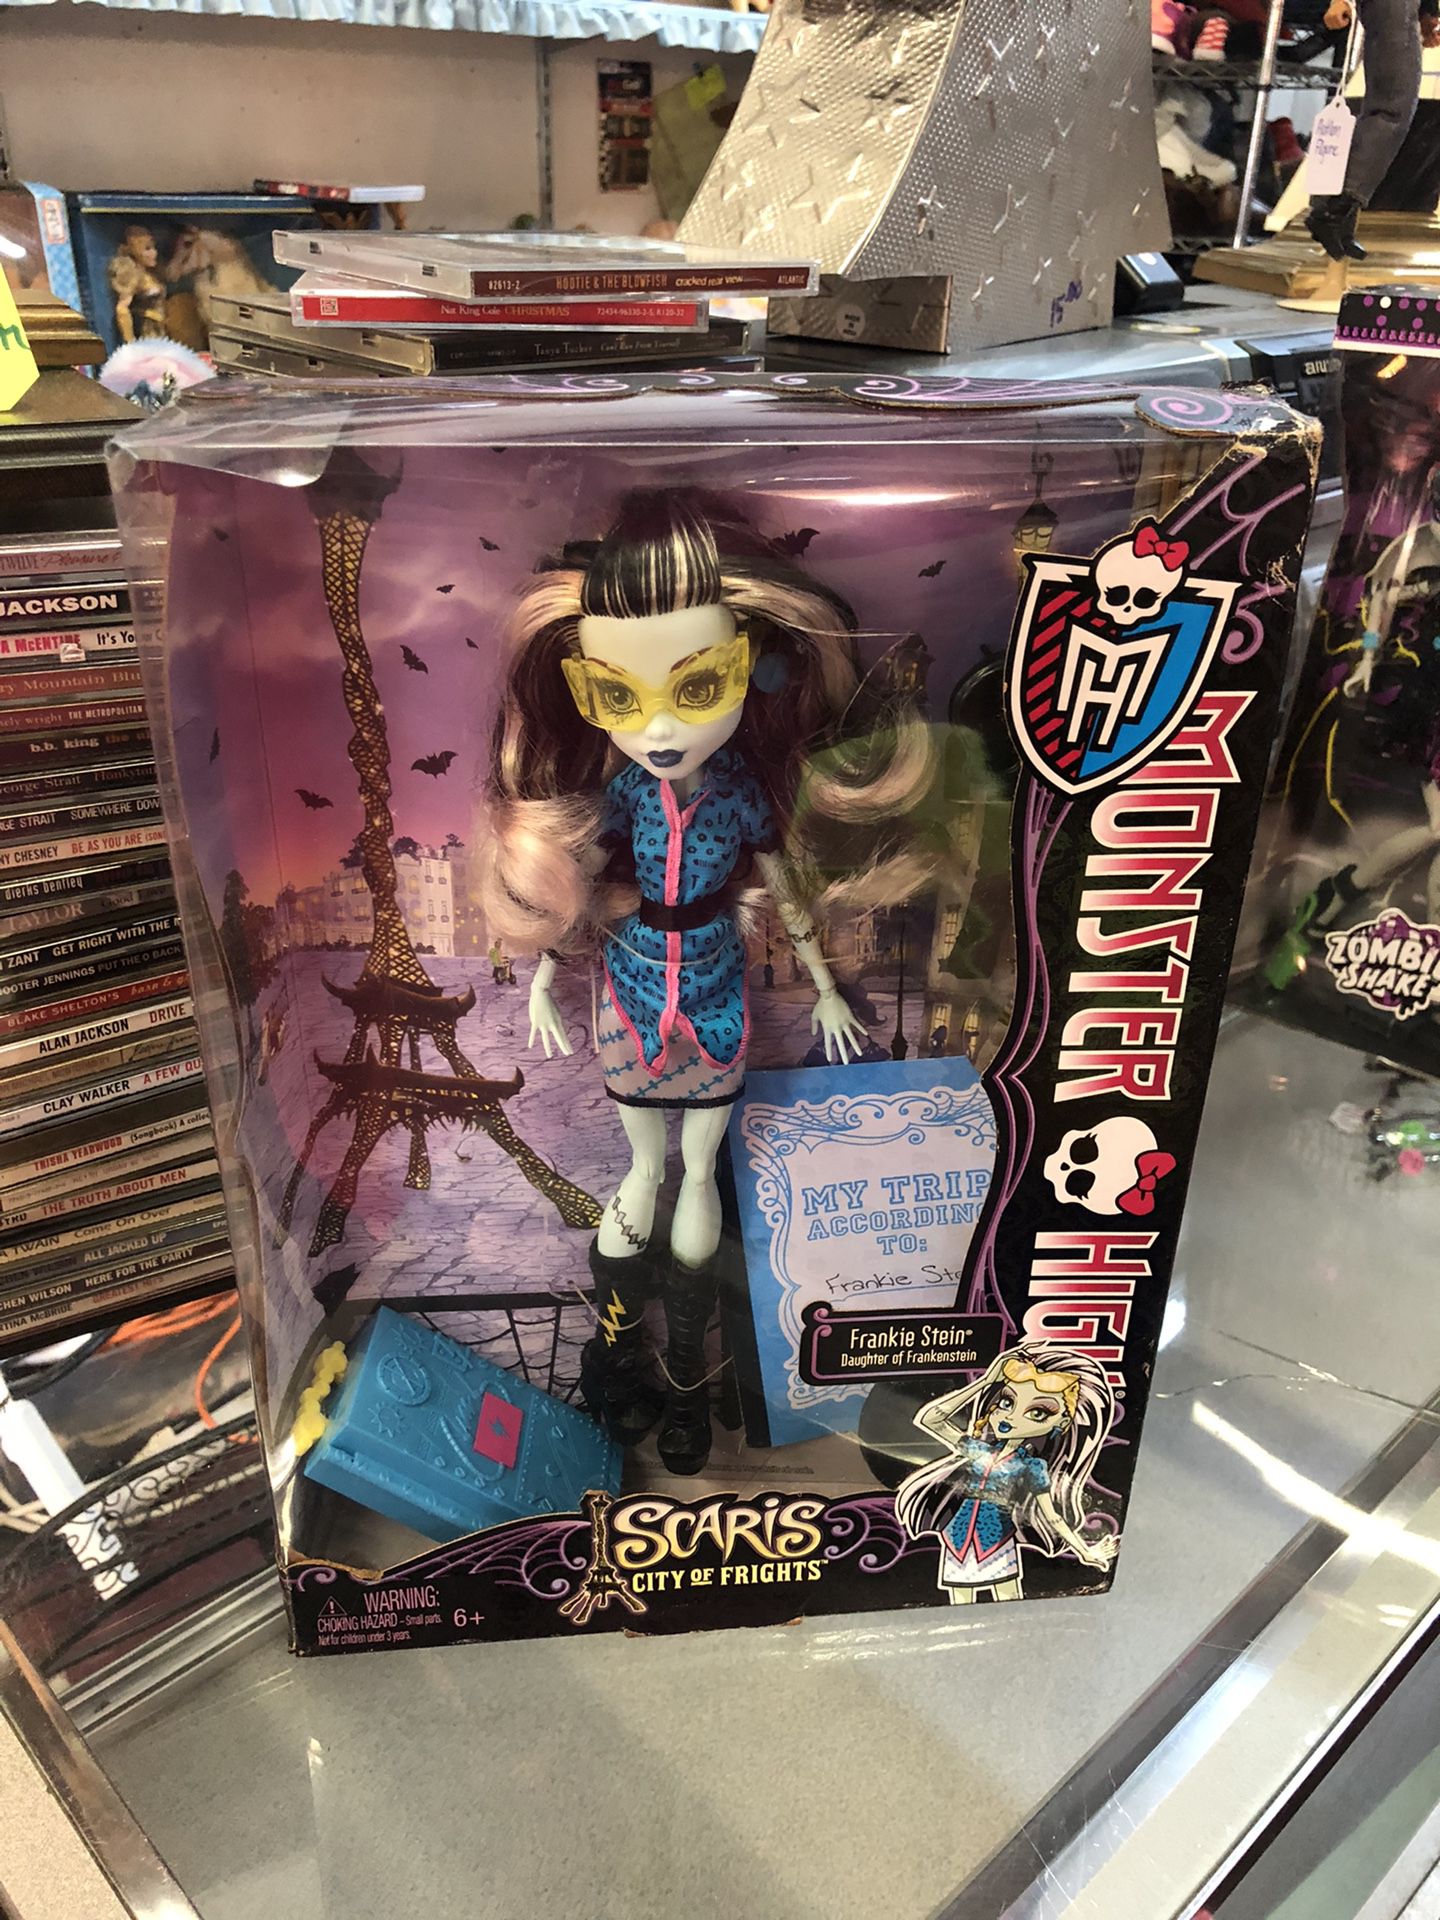 2012 Monster High “Frankie Stein” Scaris City Of Frights Collection 